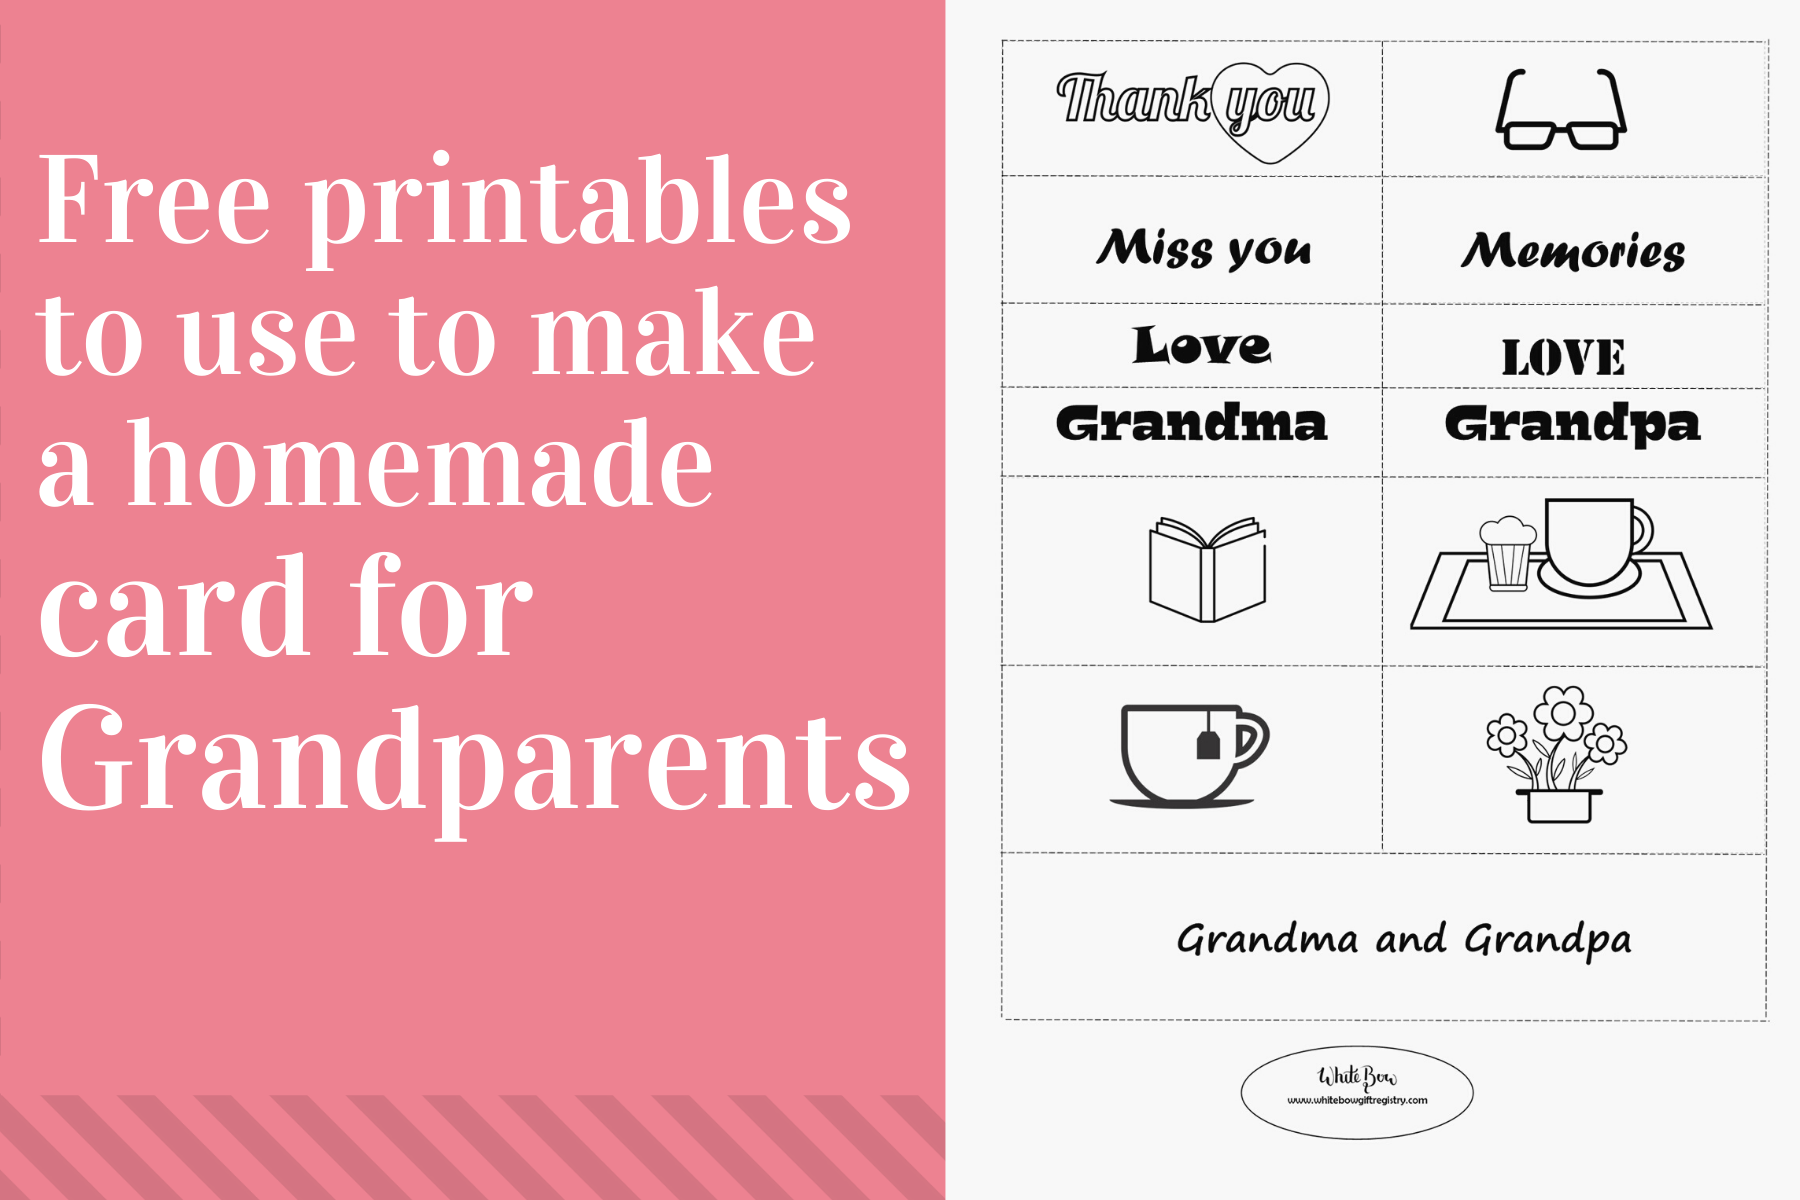 Free Printable for a card for Grandparents